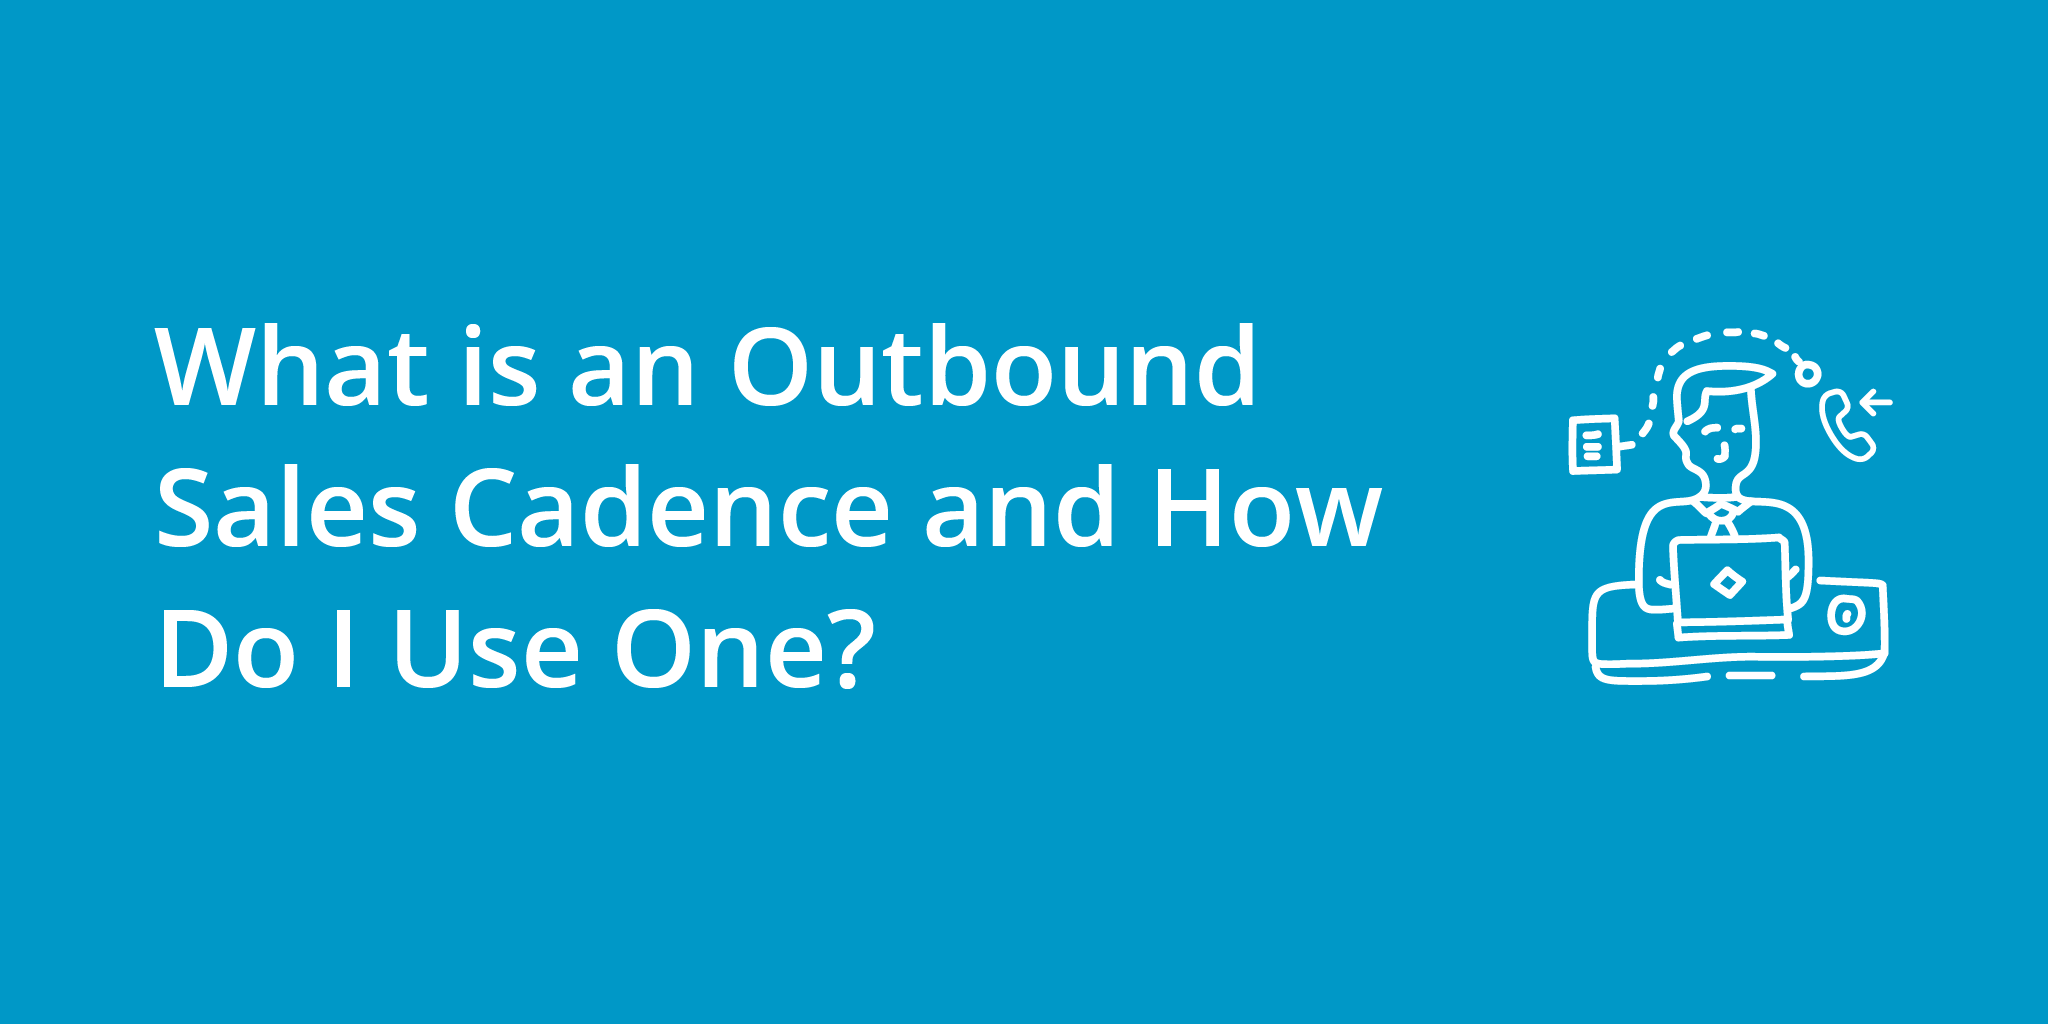 What is an Outbound Sales Cadence and How Do I Use One?